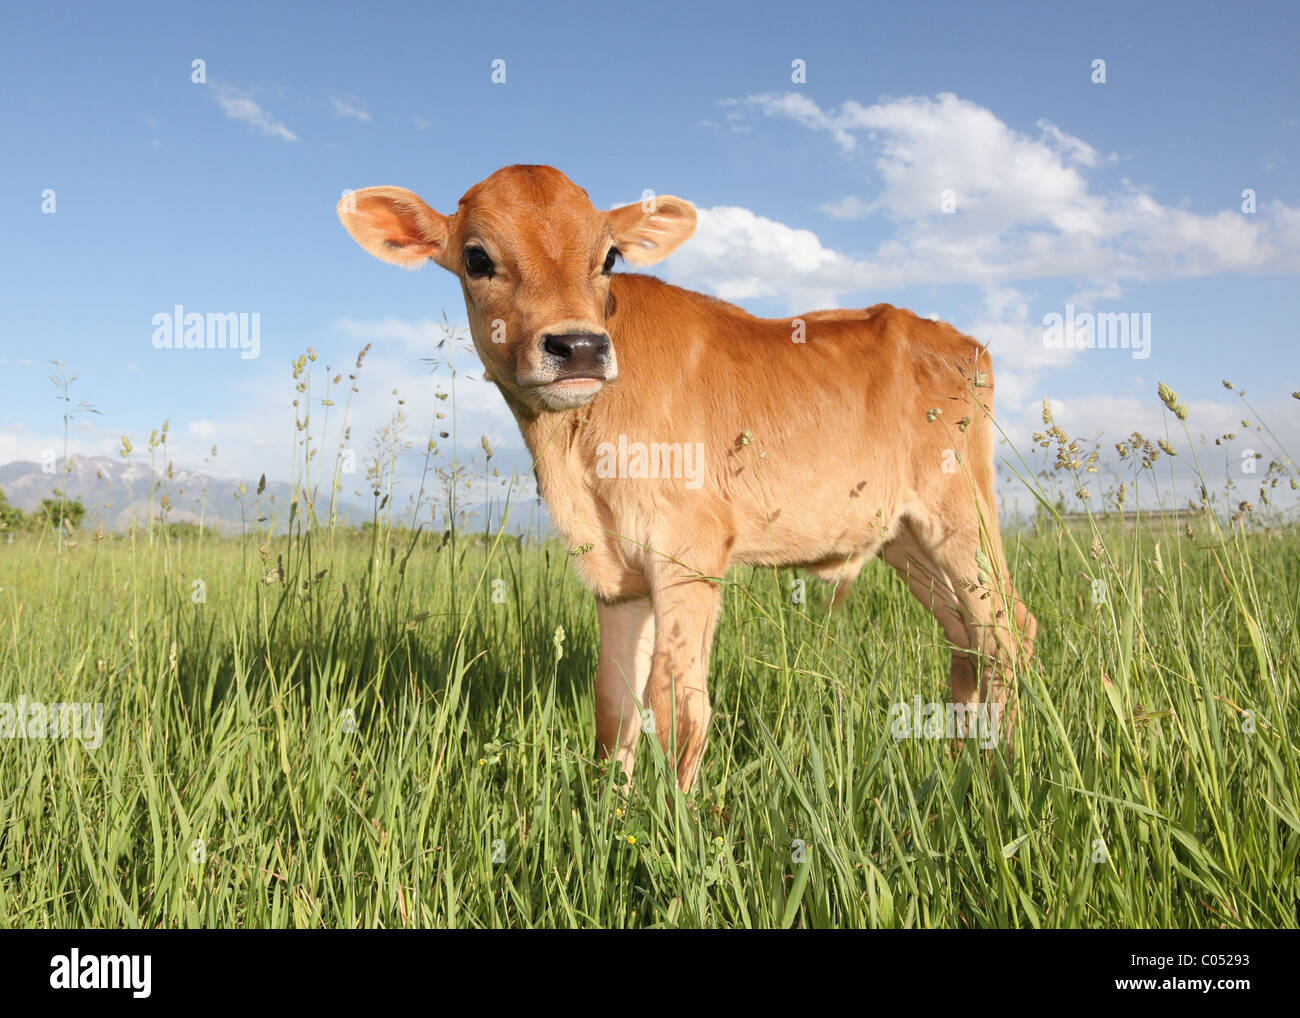 baby cow standing in field of long grass Stock Photo, Royalty Free Image: 34532319  Alamy